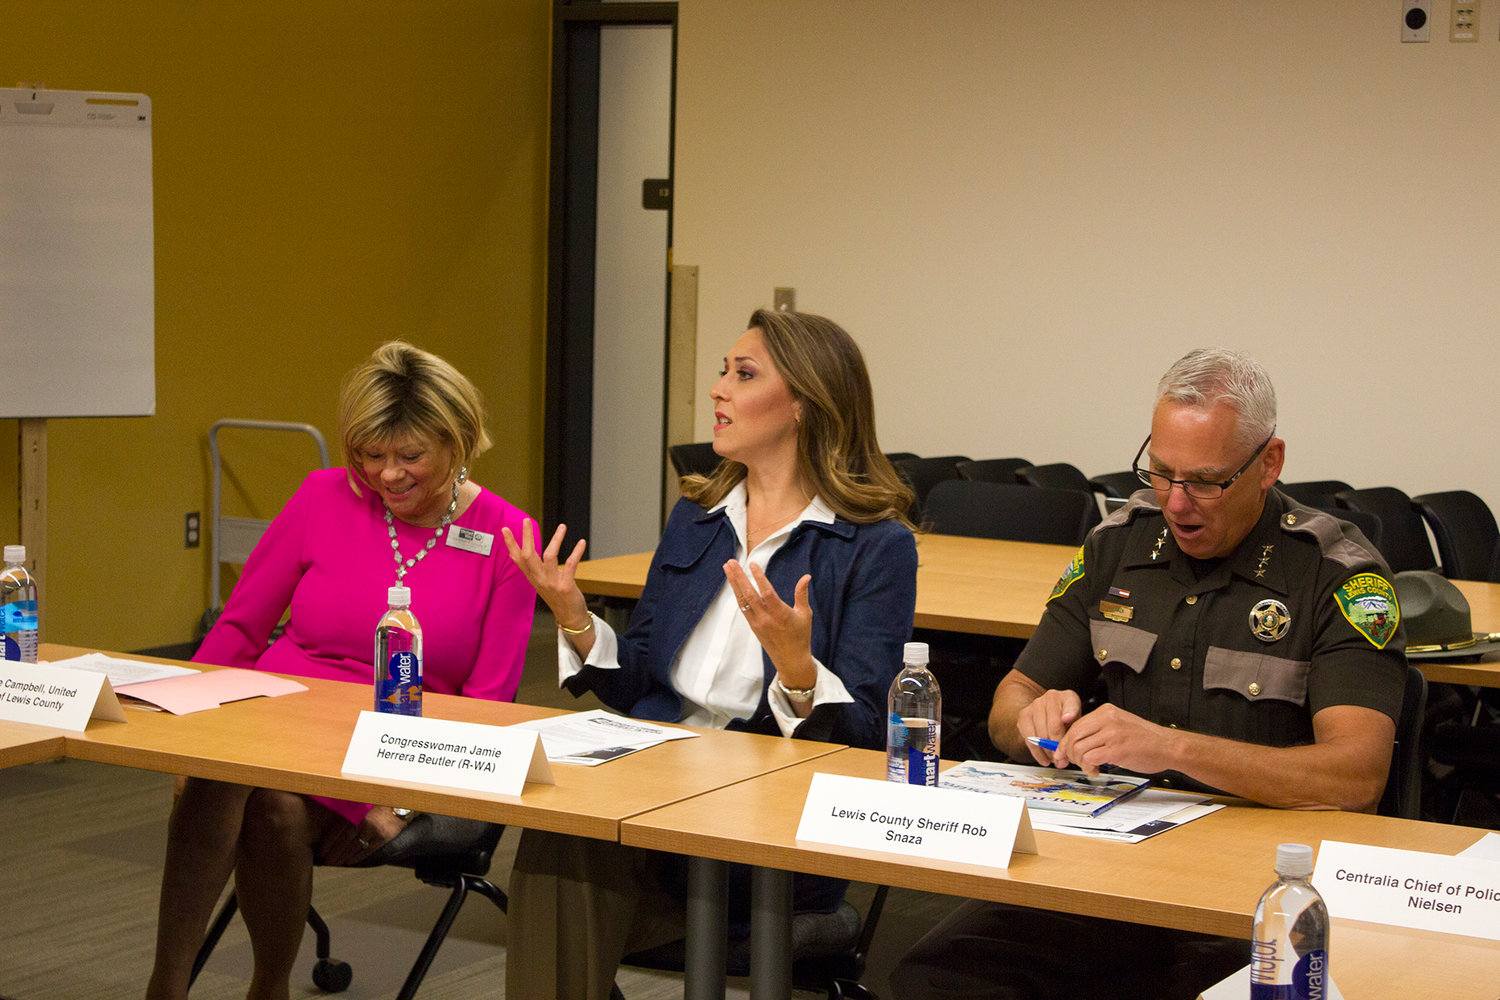 United Way of Lewis County Executive Director Debbie Campbell, Congresswoman Jaime Herrera Beutler and Lewis County Sheriff Rob Snaza participate in a roundtable discussion on early childhood education on Monday afternoon at Centralia College.